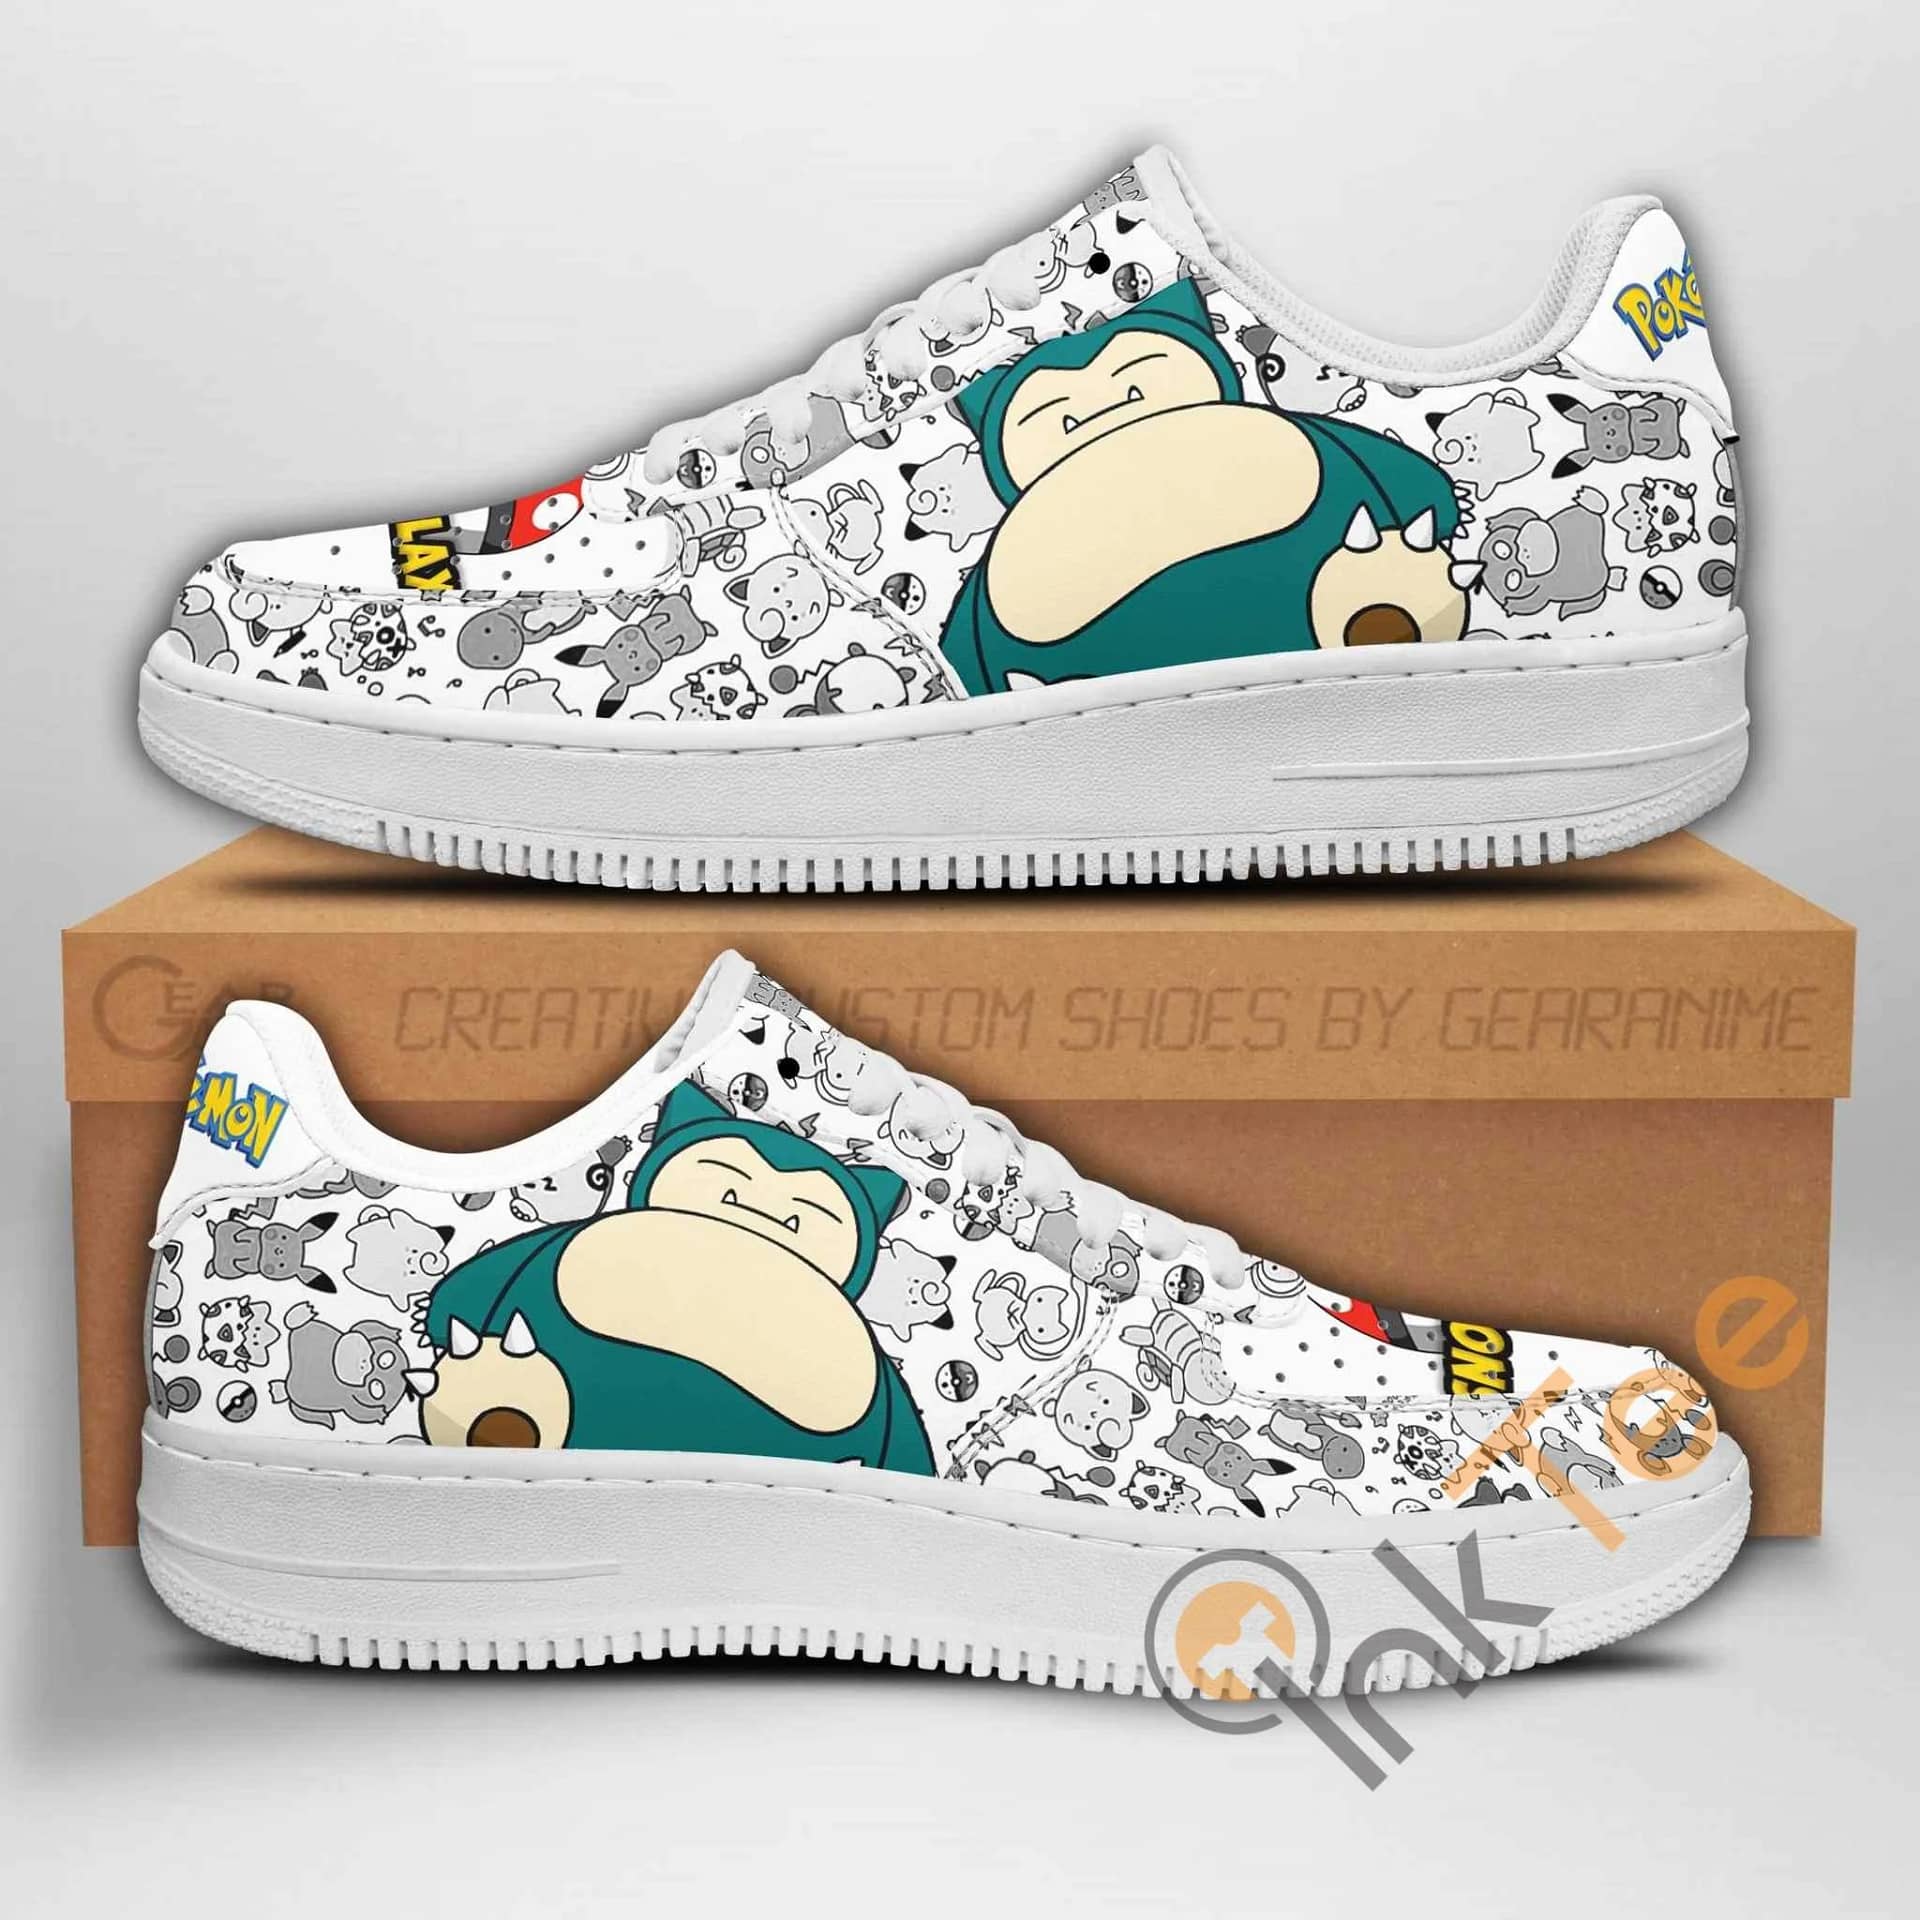 Snorlax Pokemon Nike Air Force Shoes